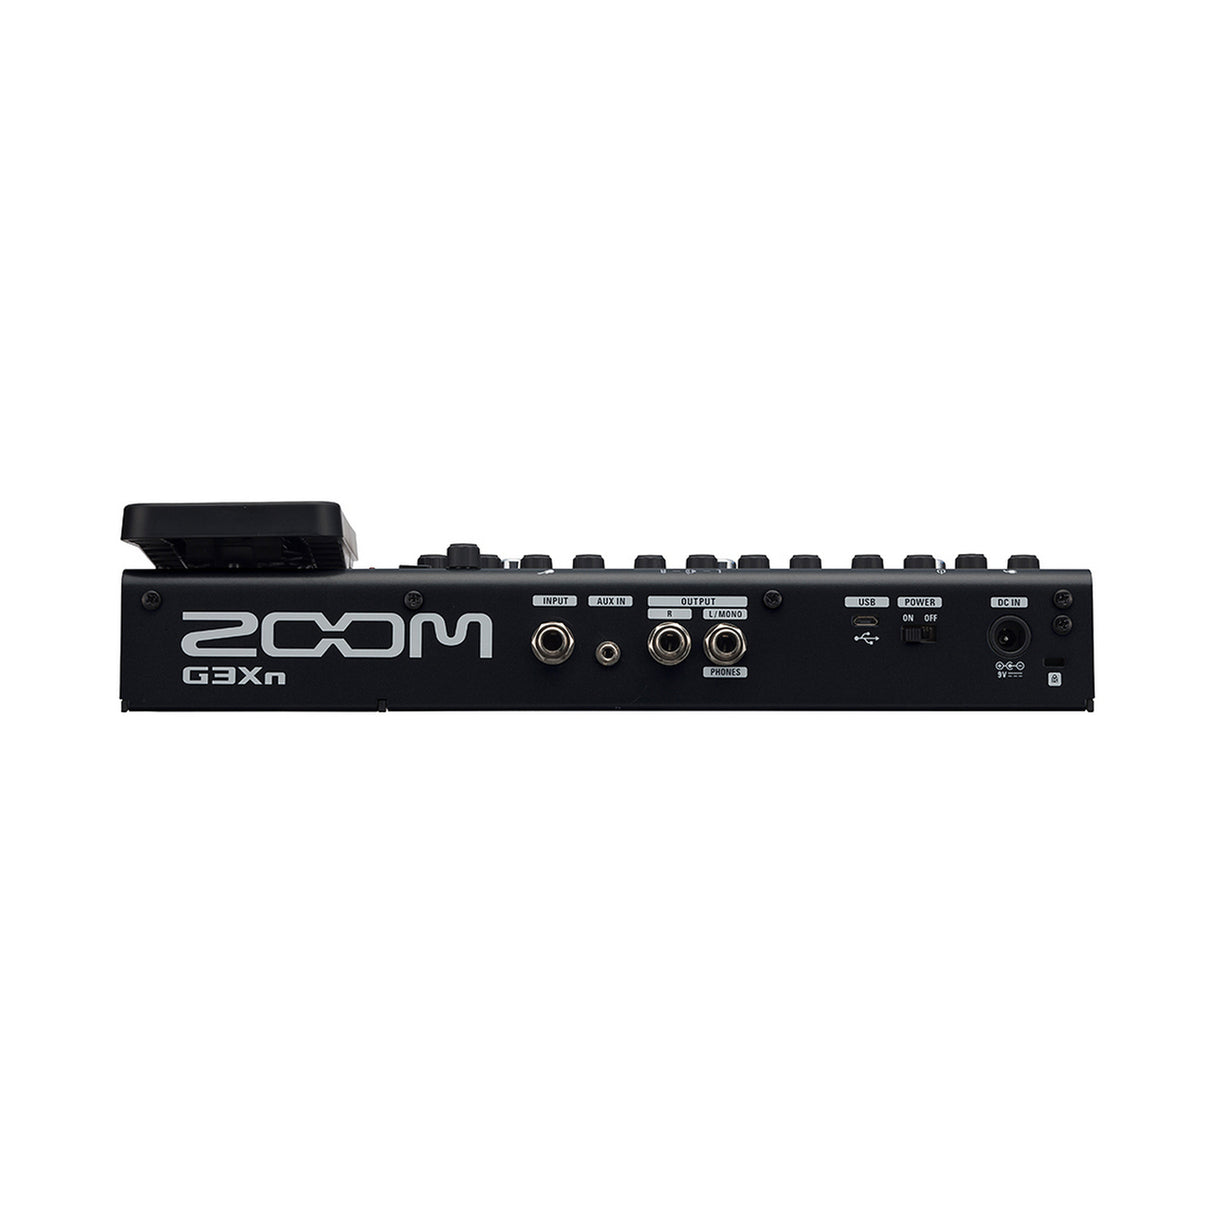 Zoom G3Xn | Multi-Effects Processor with Expression Pedal for Guitar